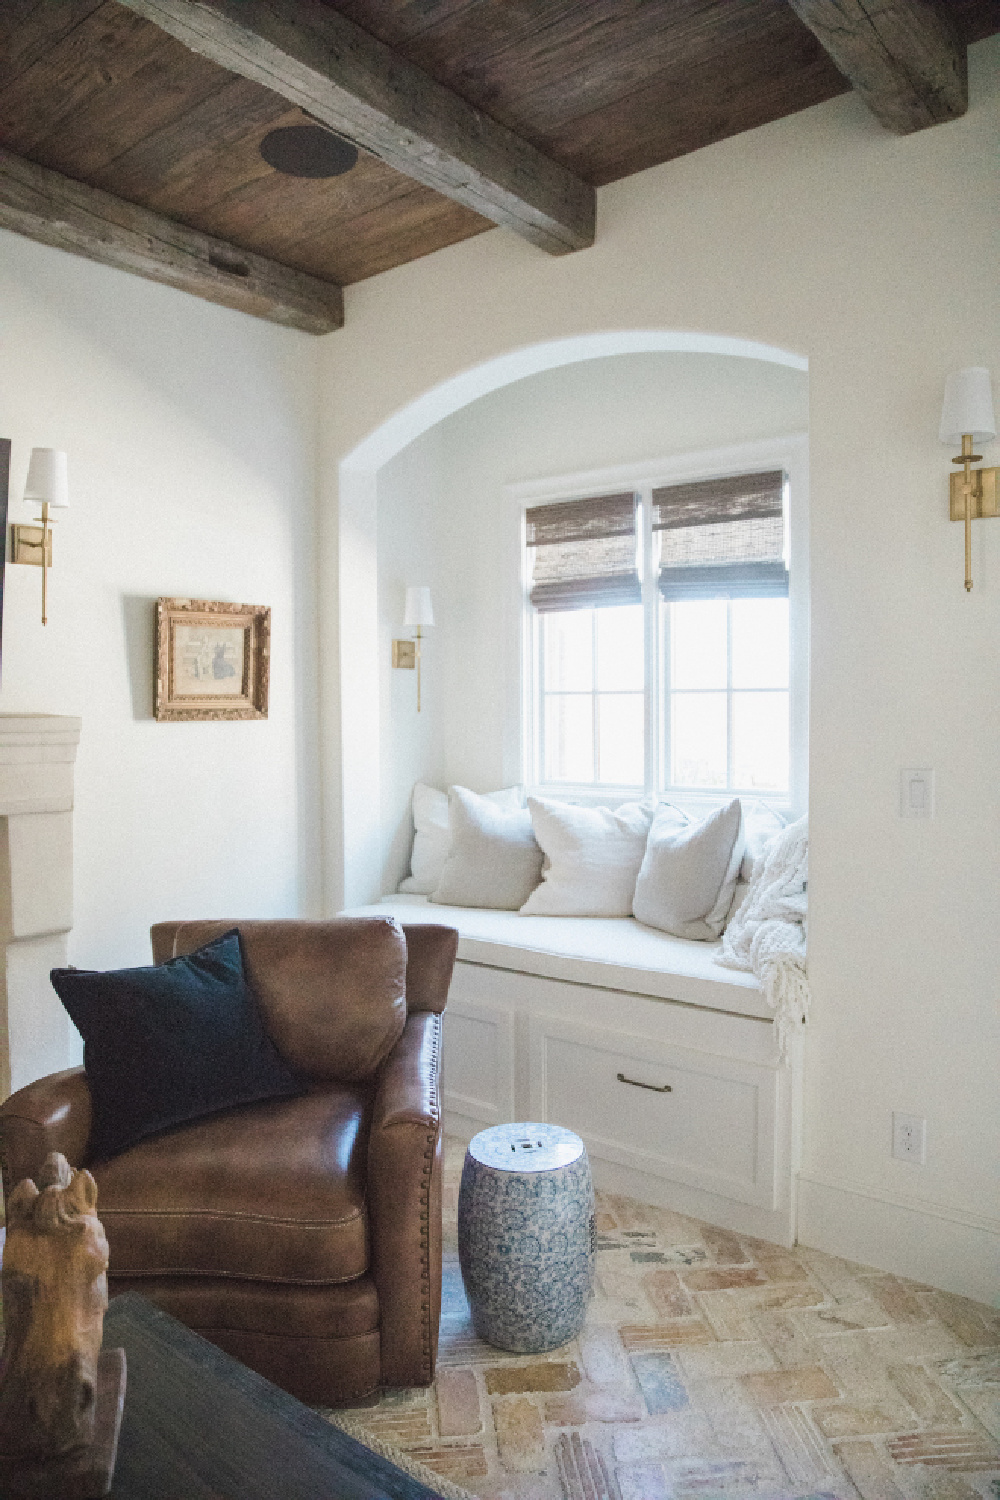 Charming French country den painted Sherwin Williams Alabaster with leather chair and arched detail over window seat nook. Brit Jones Design.